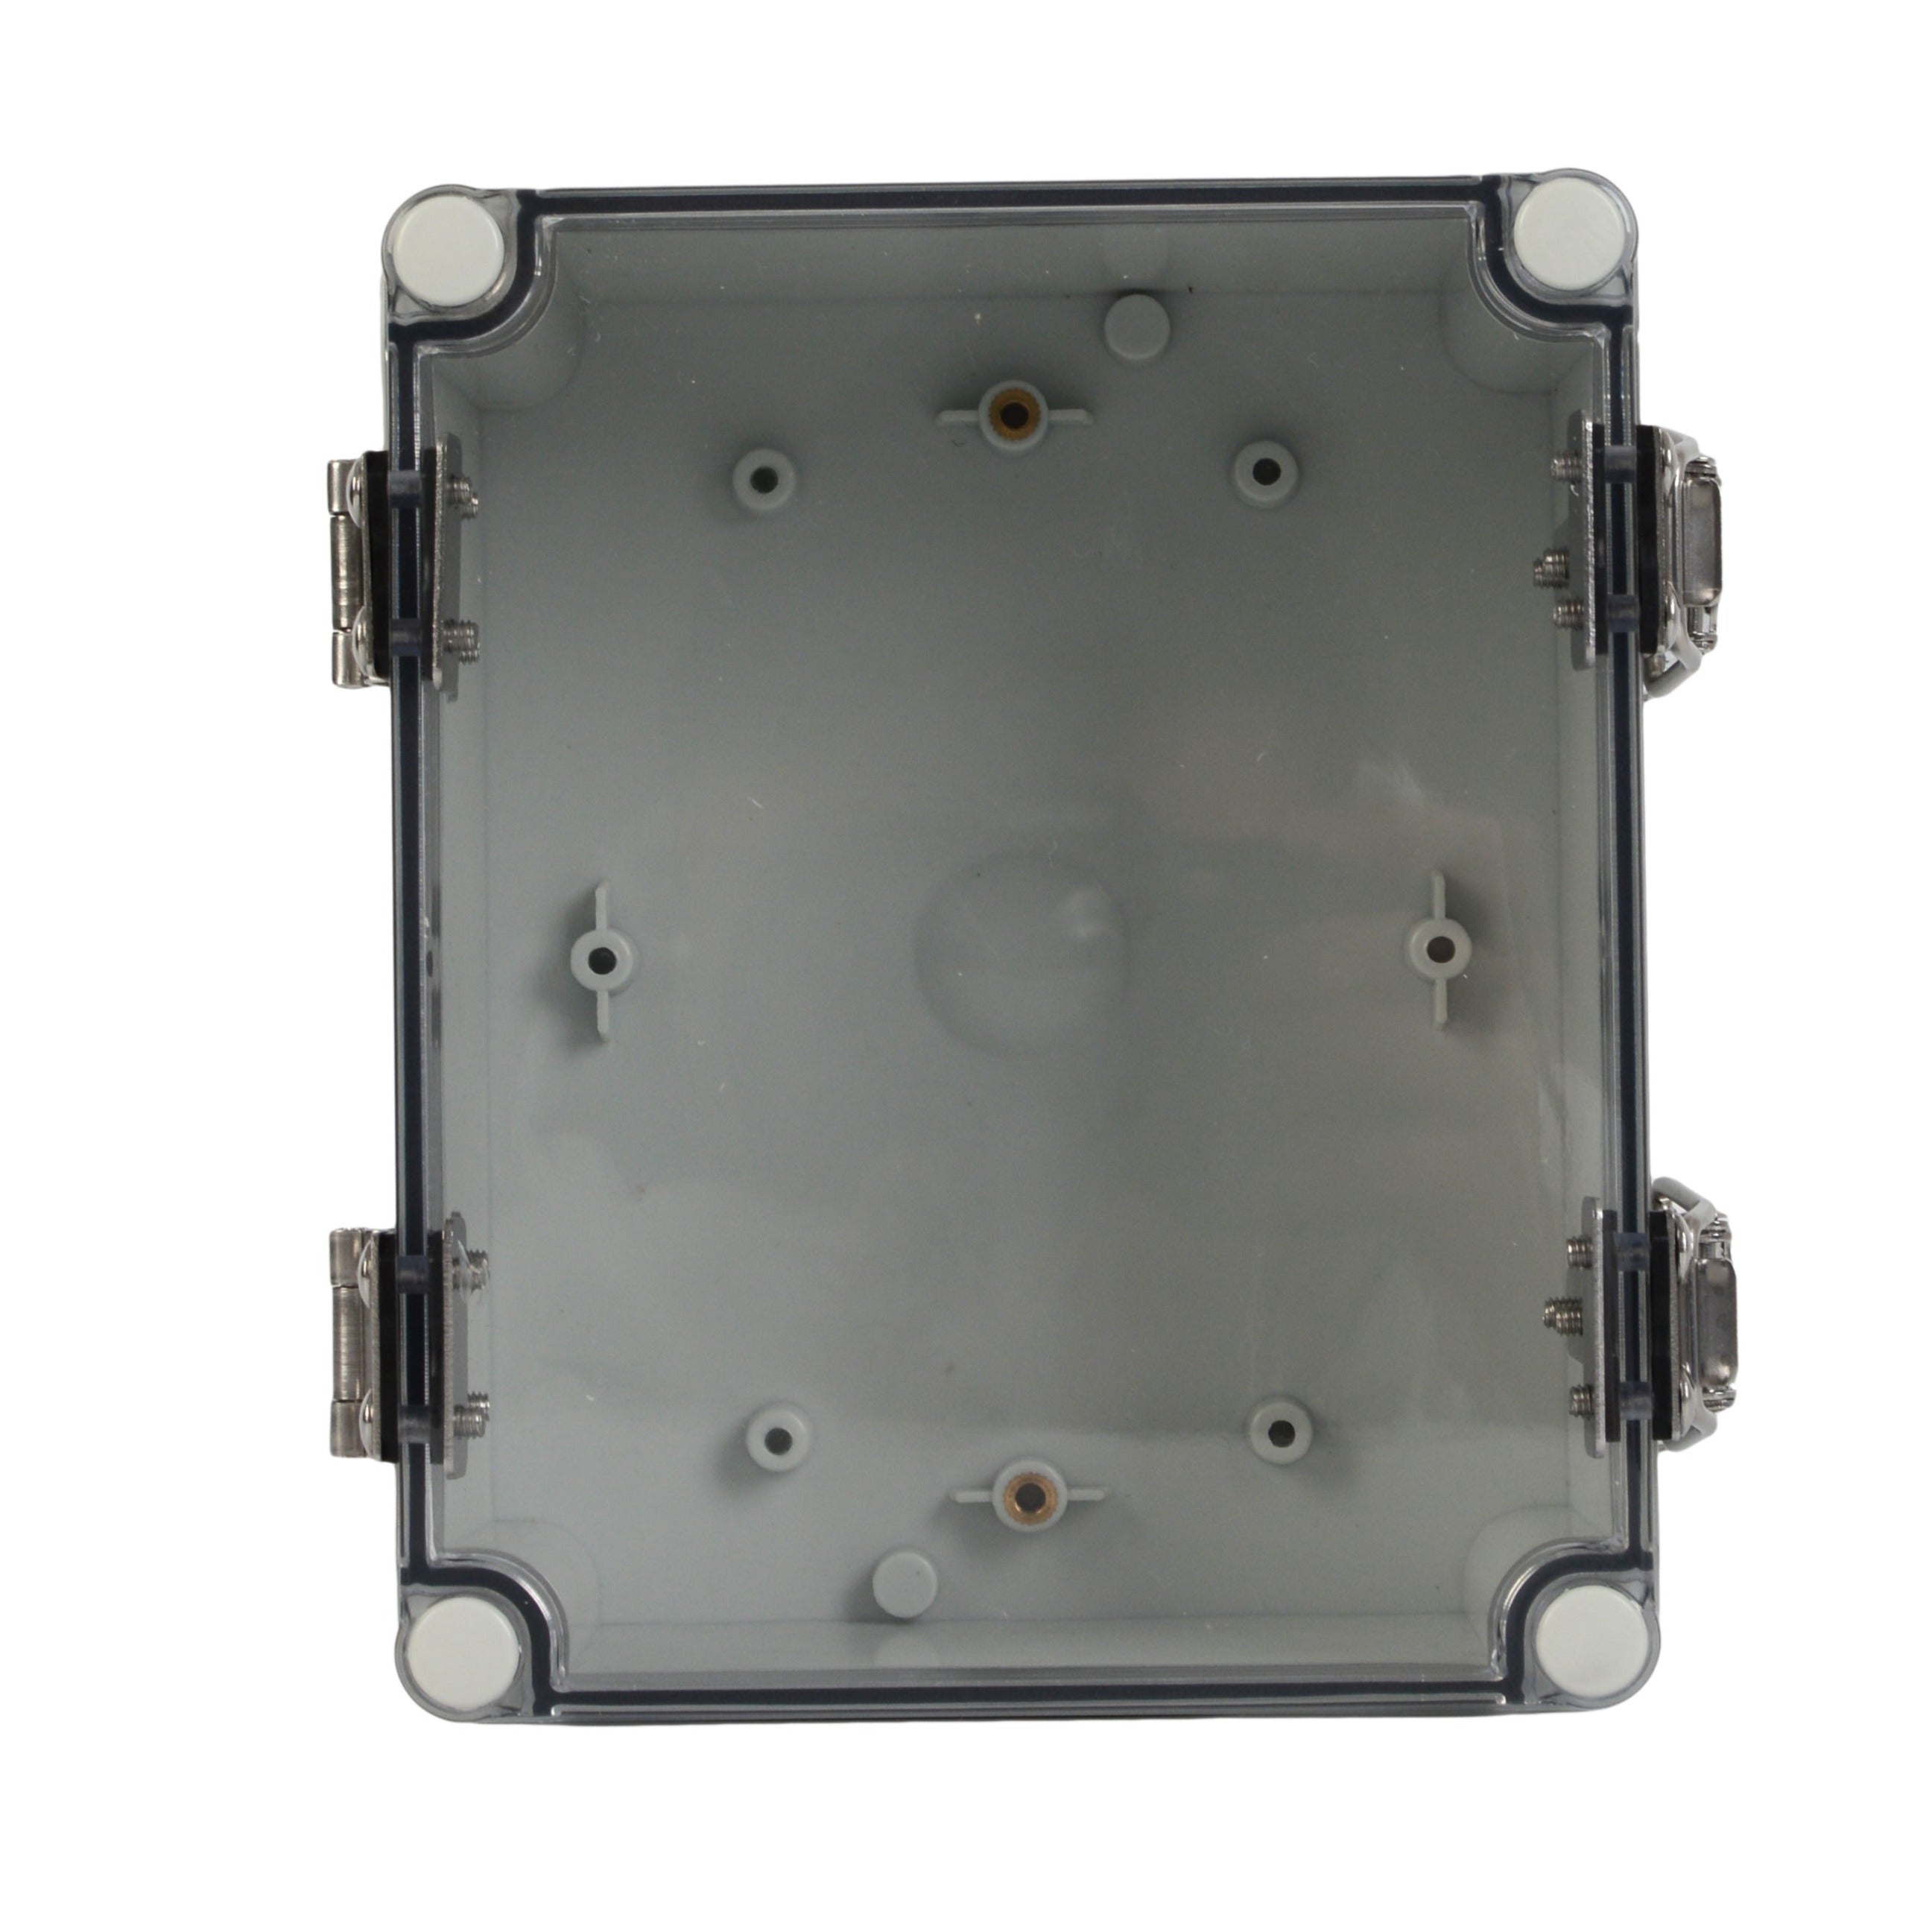 ABS IP66 Clear Lid Junction Box 140 x 170 x 95mm